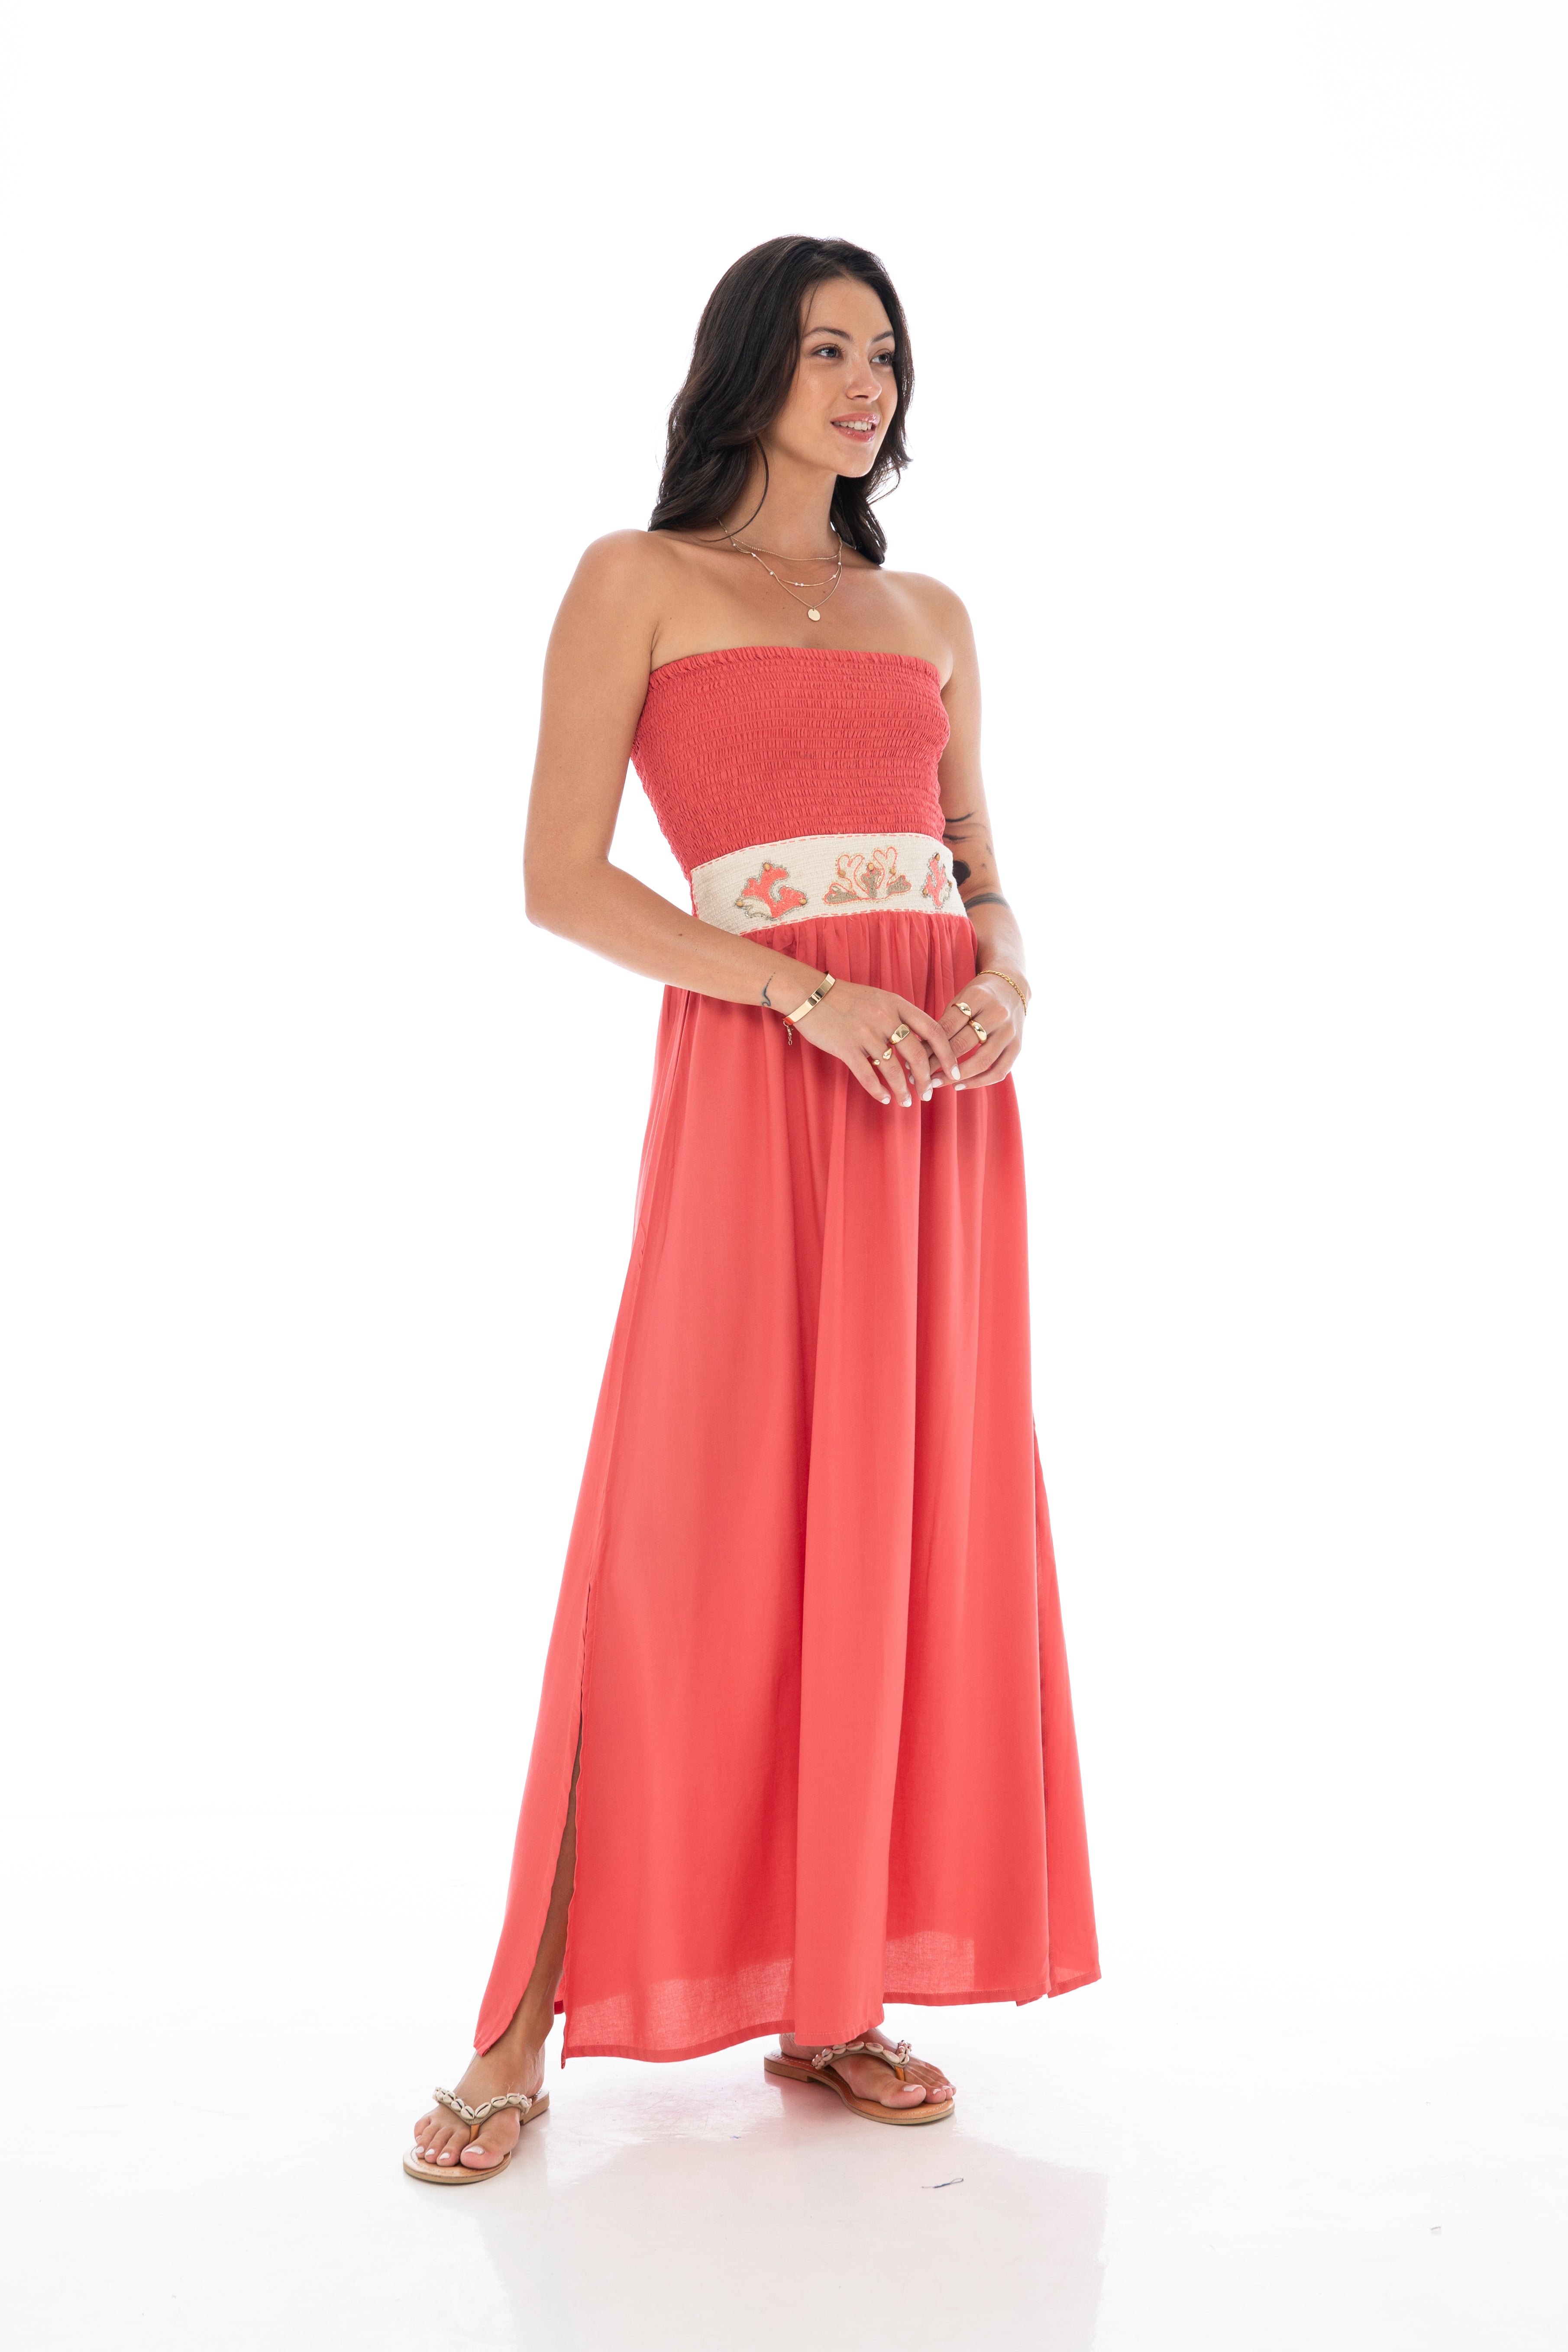 CORAL REEF MAXI DRESS CORAL